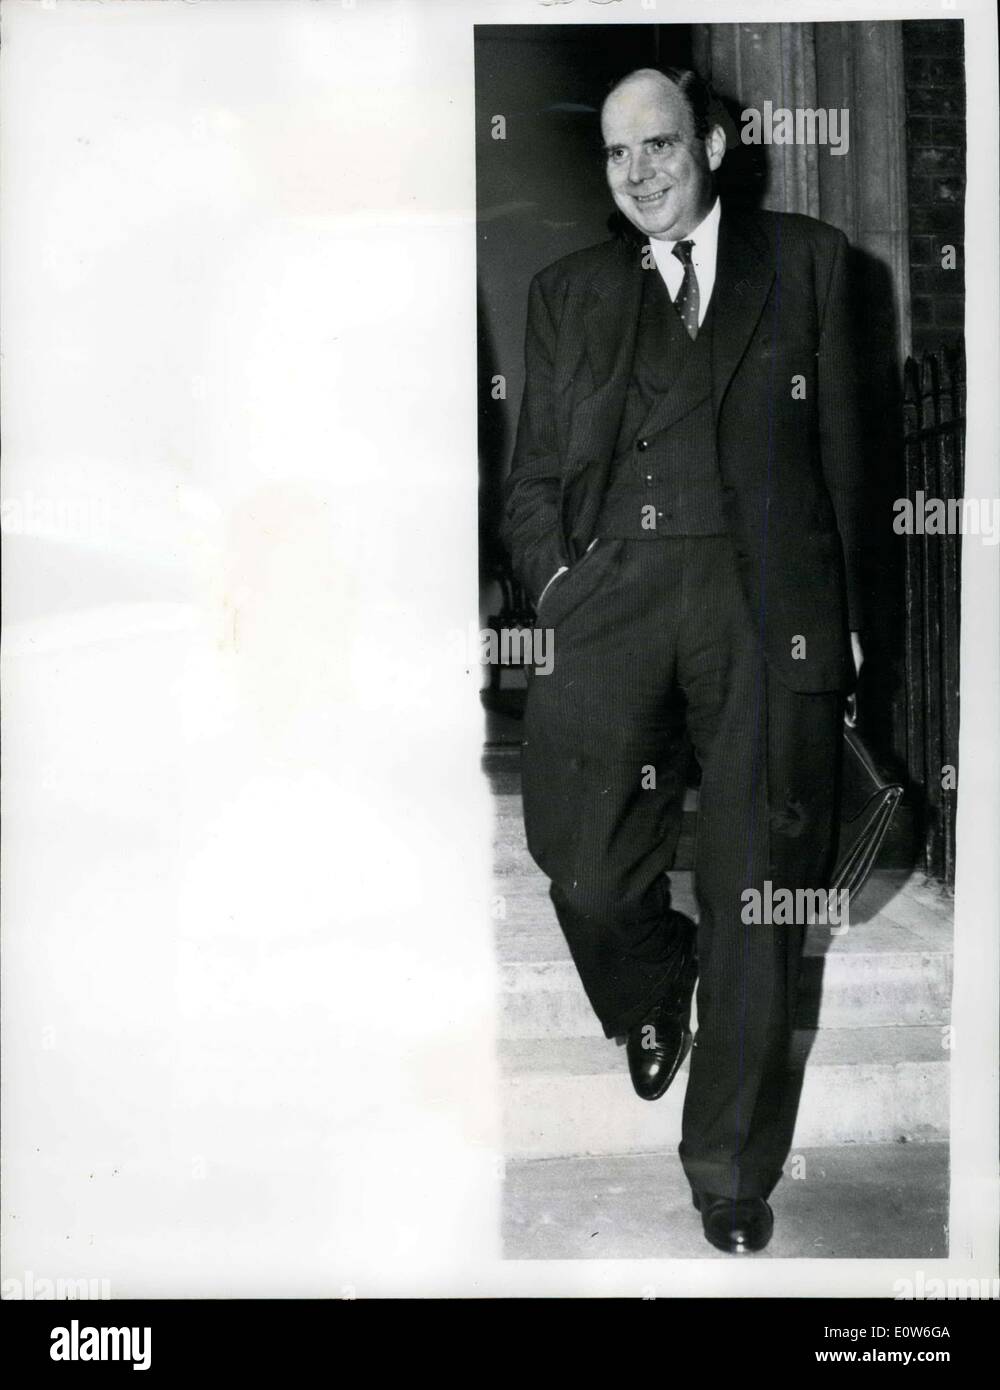 Oct. 09, 1961 - Two jobs for Iain Macleod in shake-up in the cabinet: Sweeping changes were made in the Cabinet after it made this afternoon at Admiralty House. Photo shows Iain Macleod, the former Colonial Secretary, who jew takes up two of Mr. Butler's jobs as Tory Party Chairman and Leader of the House of Commons, leaving Admiralty House after the meeting this afternoon. Stock Photo